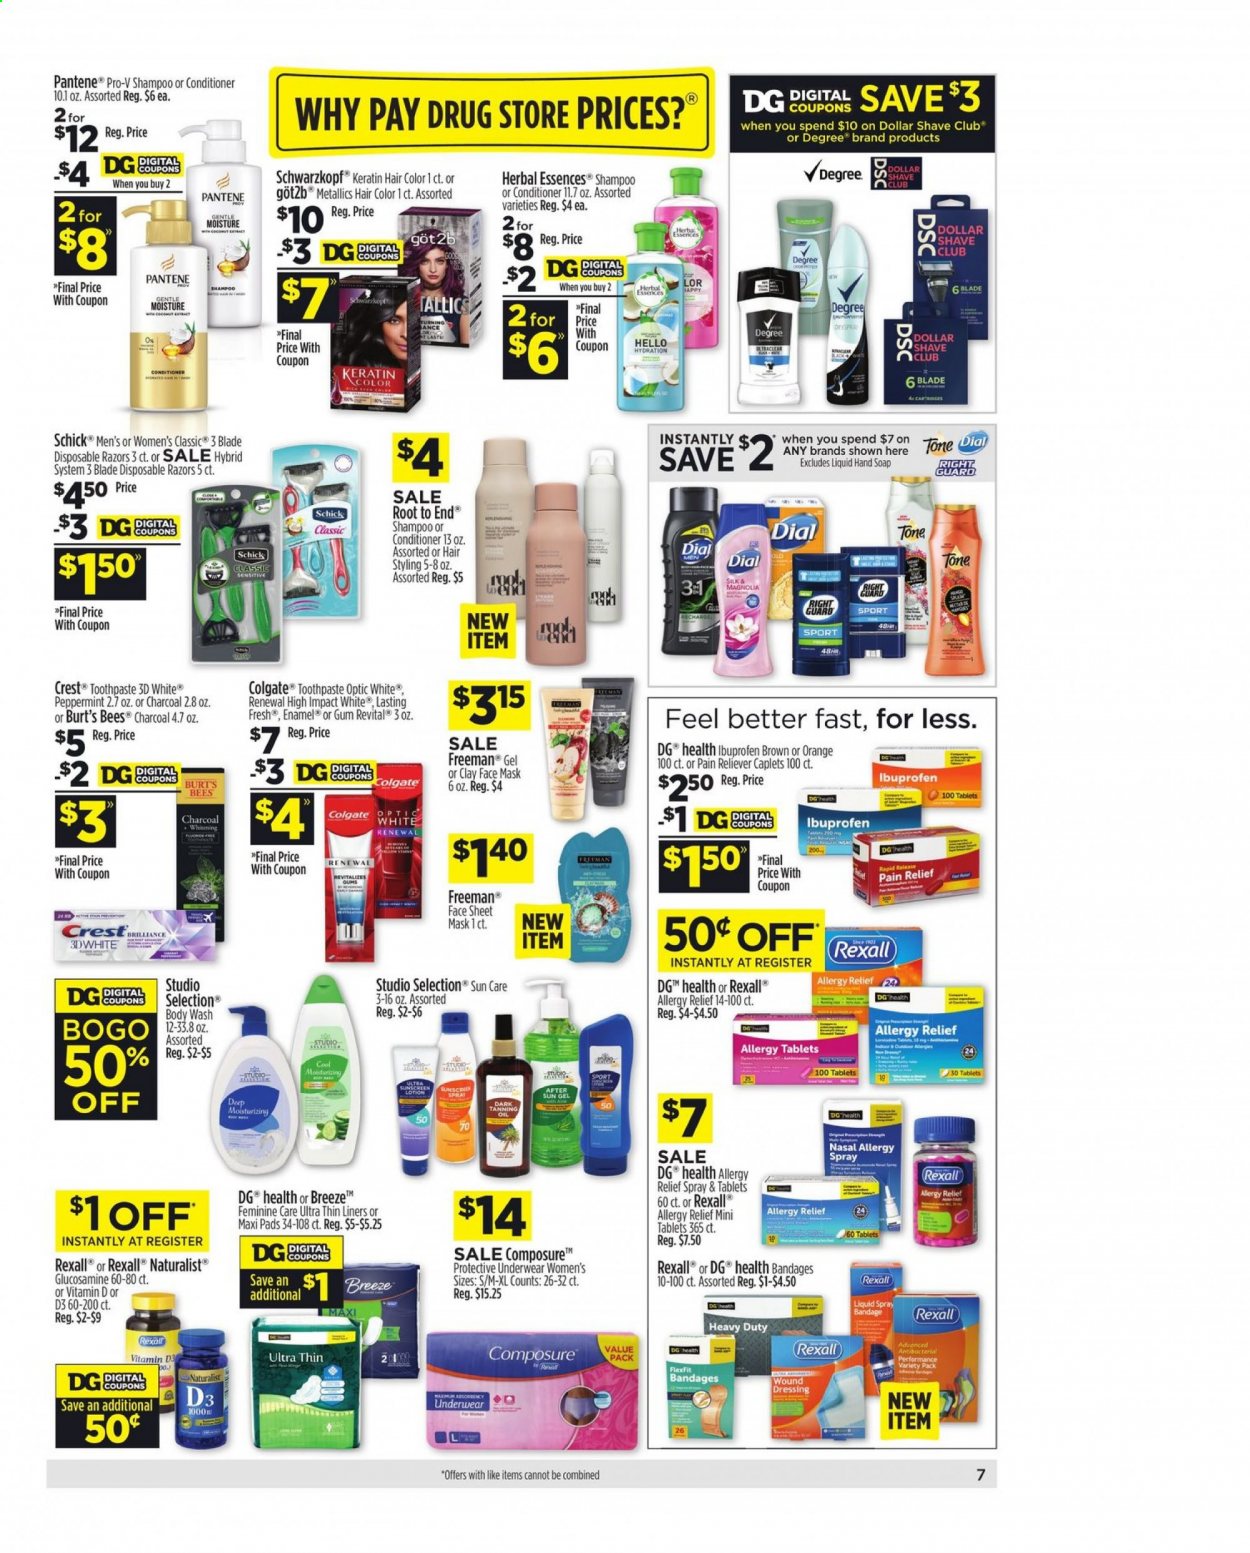 thumbnail - Dollar General Flyer - 05/02/2021 - 05/08/2021 - Sales products - oranges, L'Or, Composure, body wash, shampoo, Schwarzkopf, Dial, Colgate, toothpaste, Crest, sanitary pads, face mask, Dollar Shave Club, conditioner, Pantene, hair color, Herbal Essences, keratin, Schick, disposable razor, charcoal, pain relief, glucosamine, Ibuprofen, vitamin D3, allergy relief. Page 7.